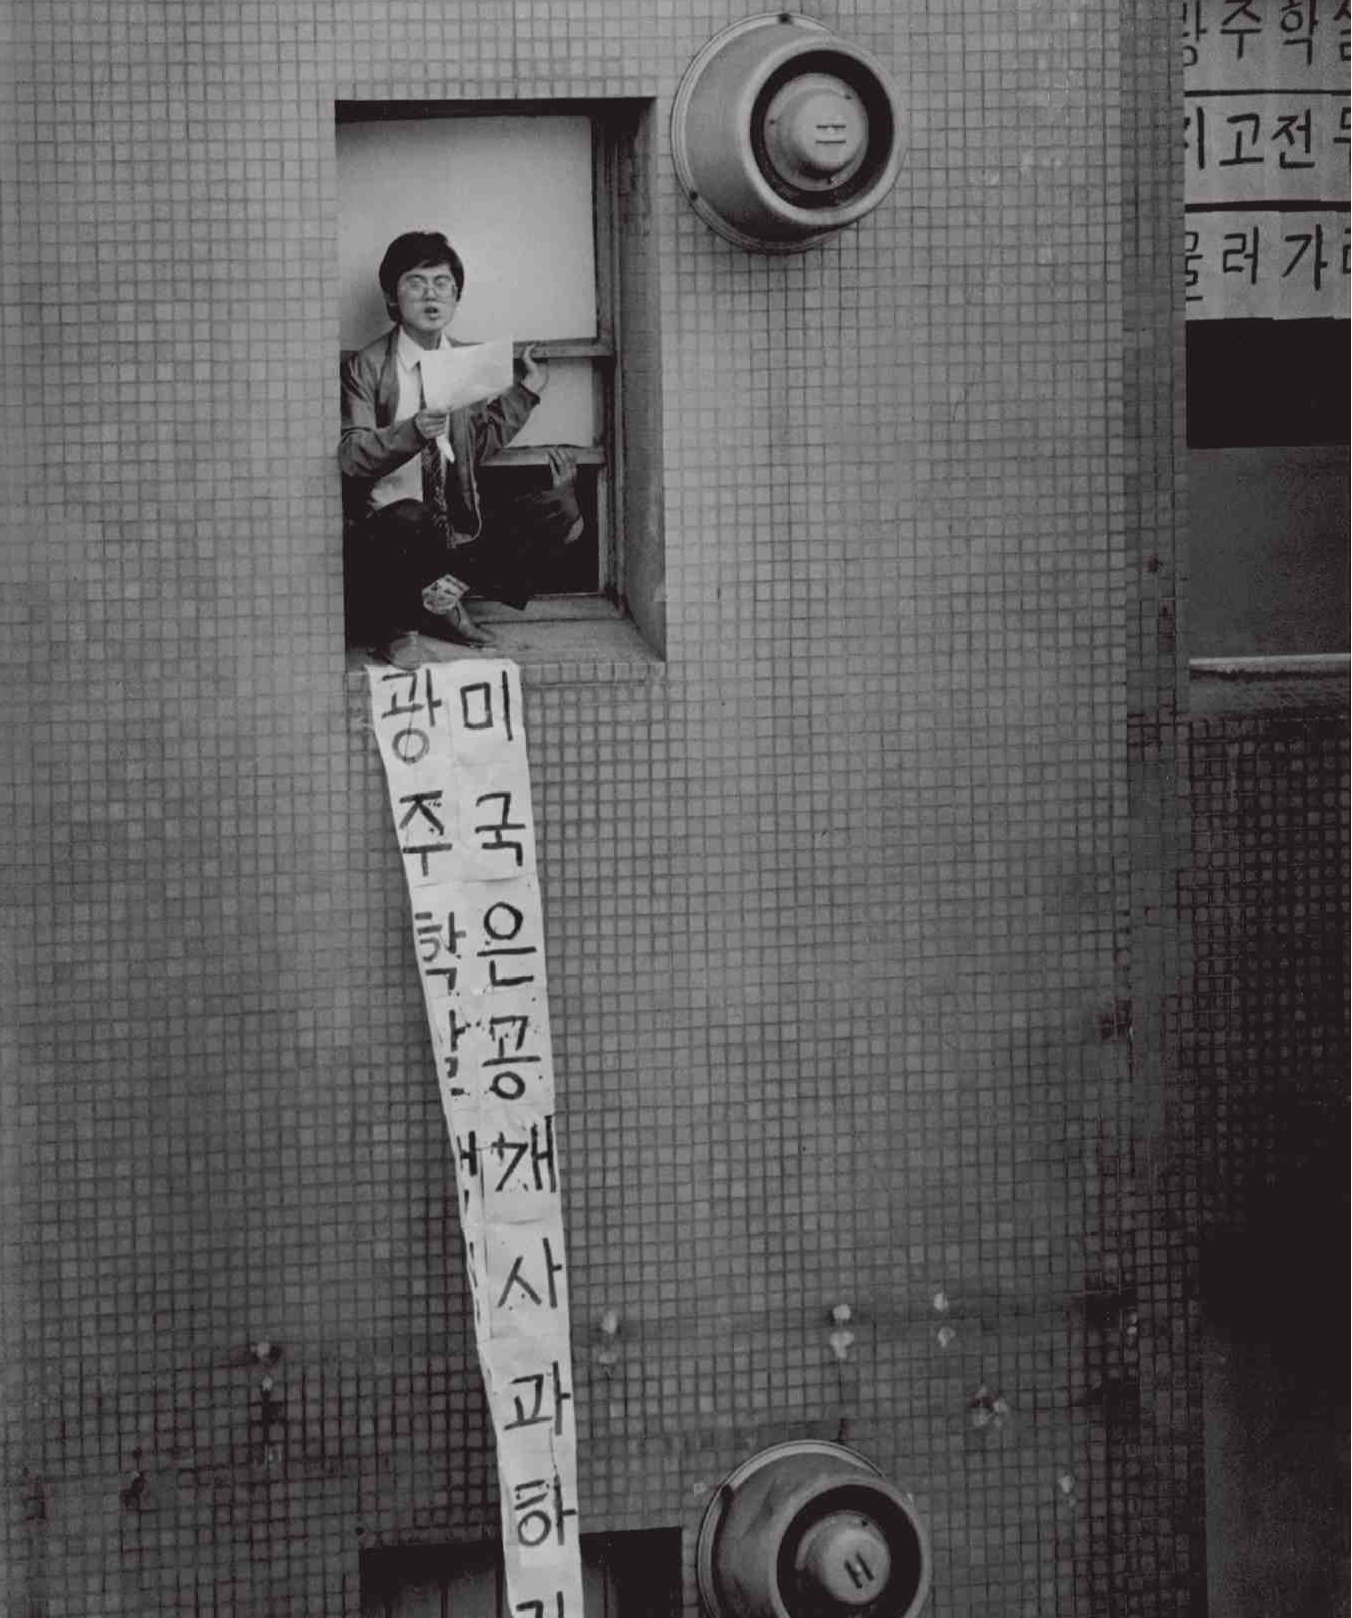 A sit-in protest at the US cultural Center in Seoul, 1985.